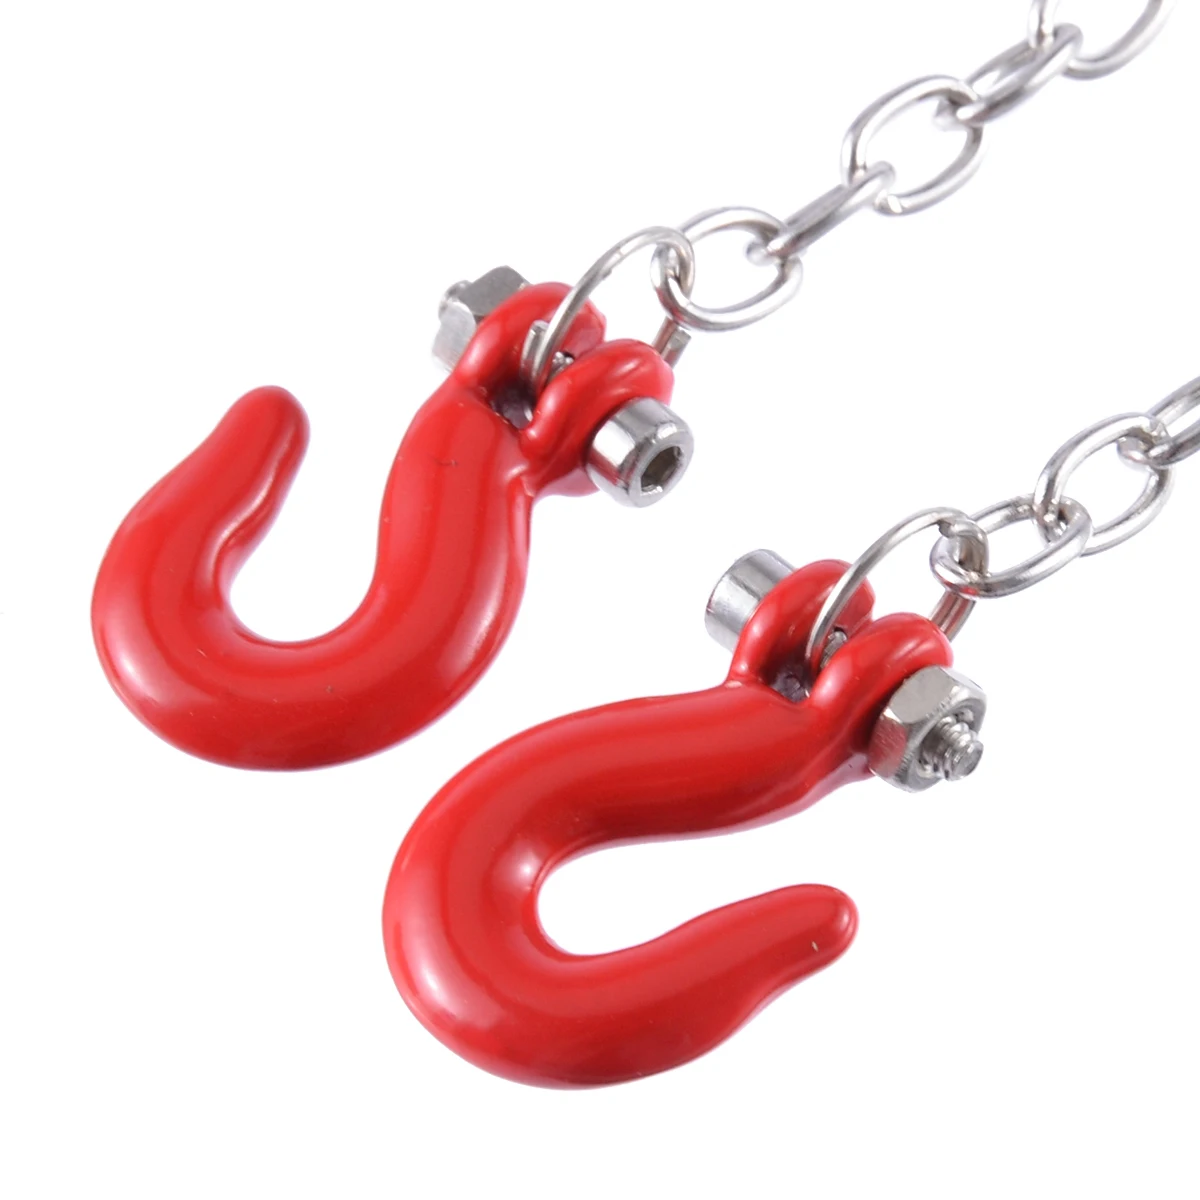 New Arrival 1 pc RC Car Metal Tow Hook Chain Decoration For 1:10 RC Crawler Climbing Truck Remote Control Car Accessories